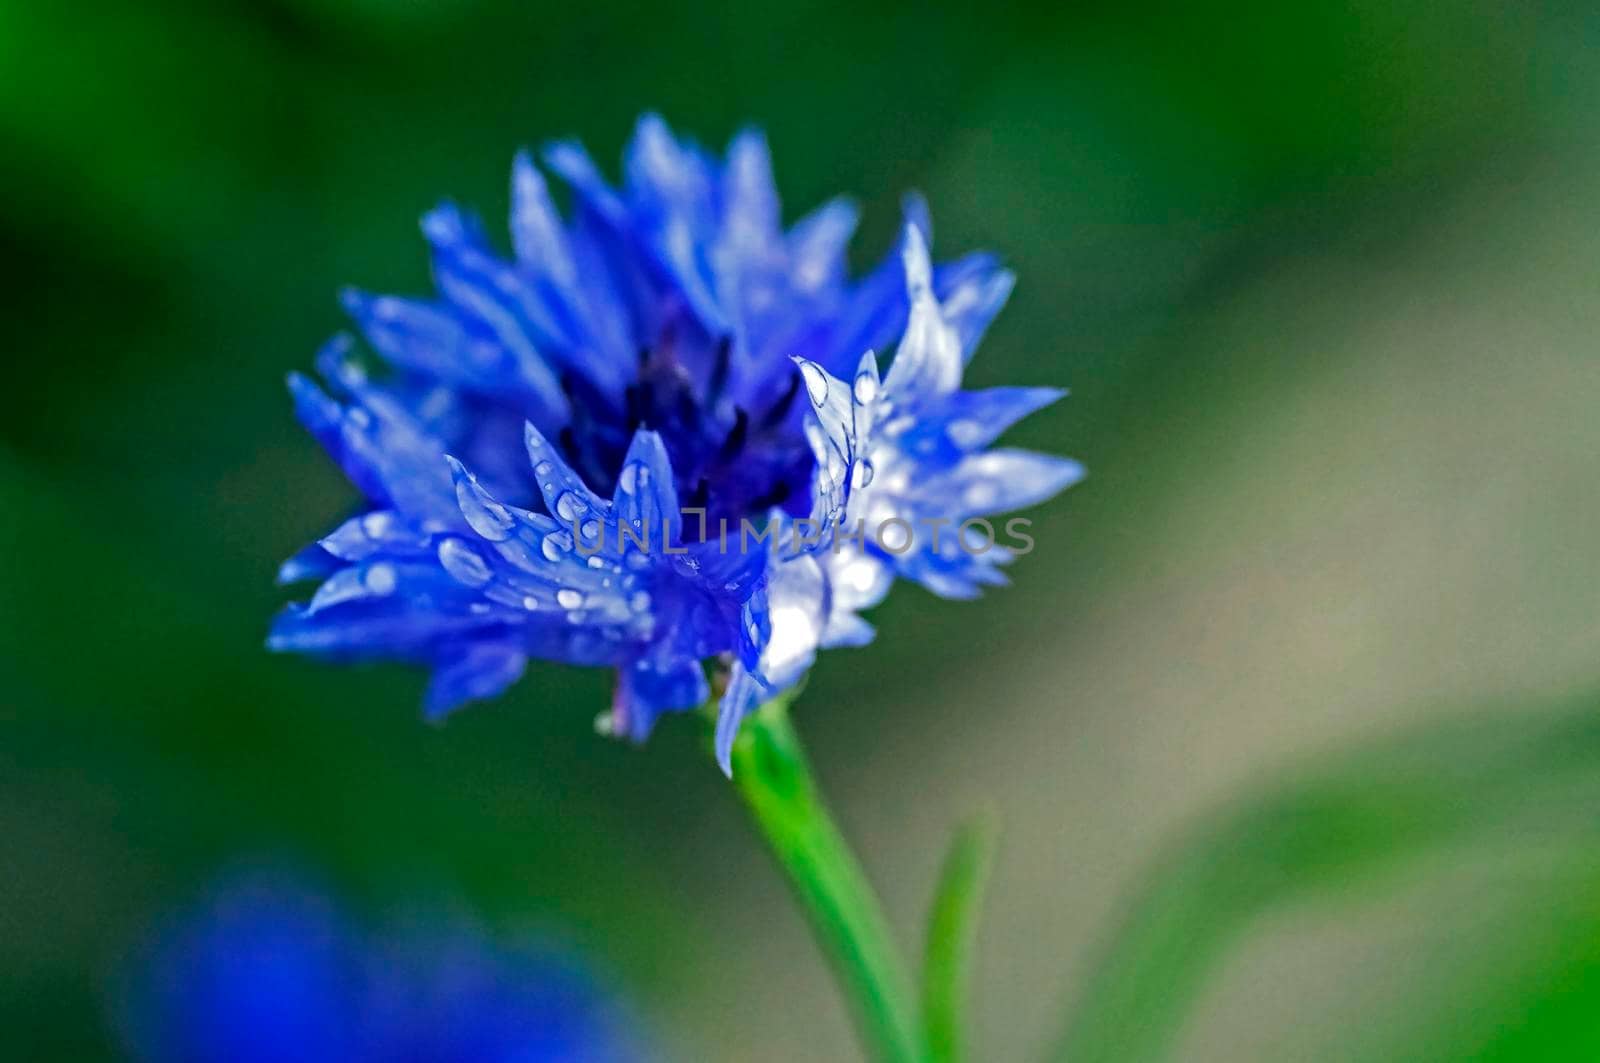 cornflower with raindrops on the petals on a blurred natural background